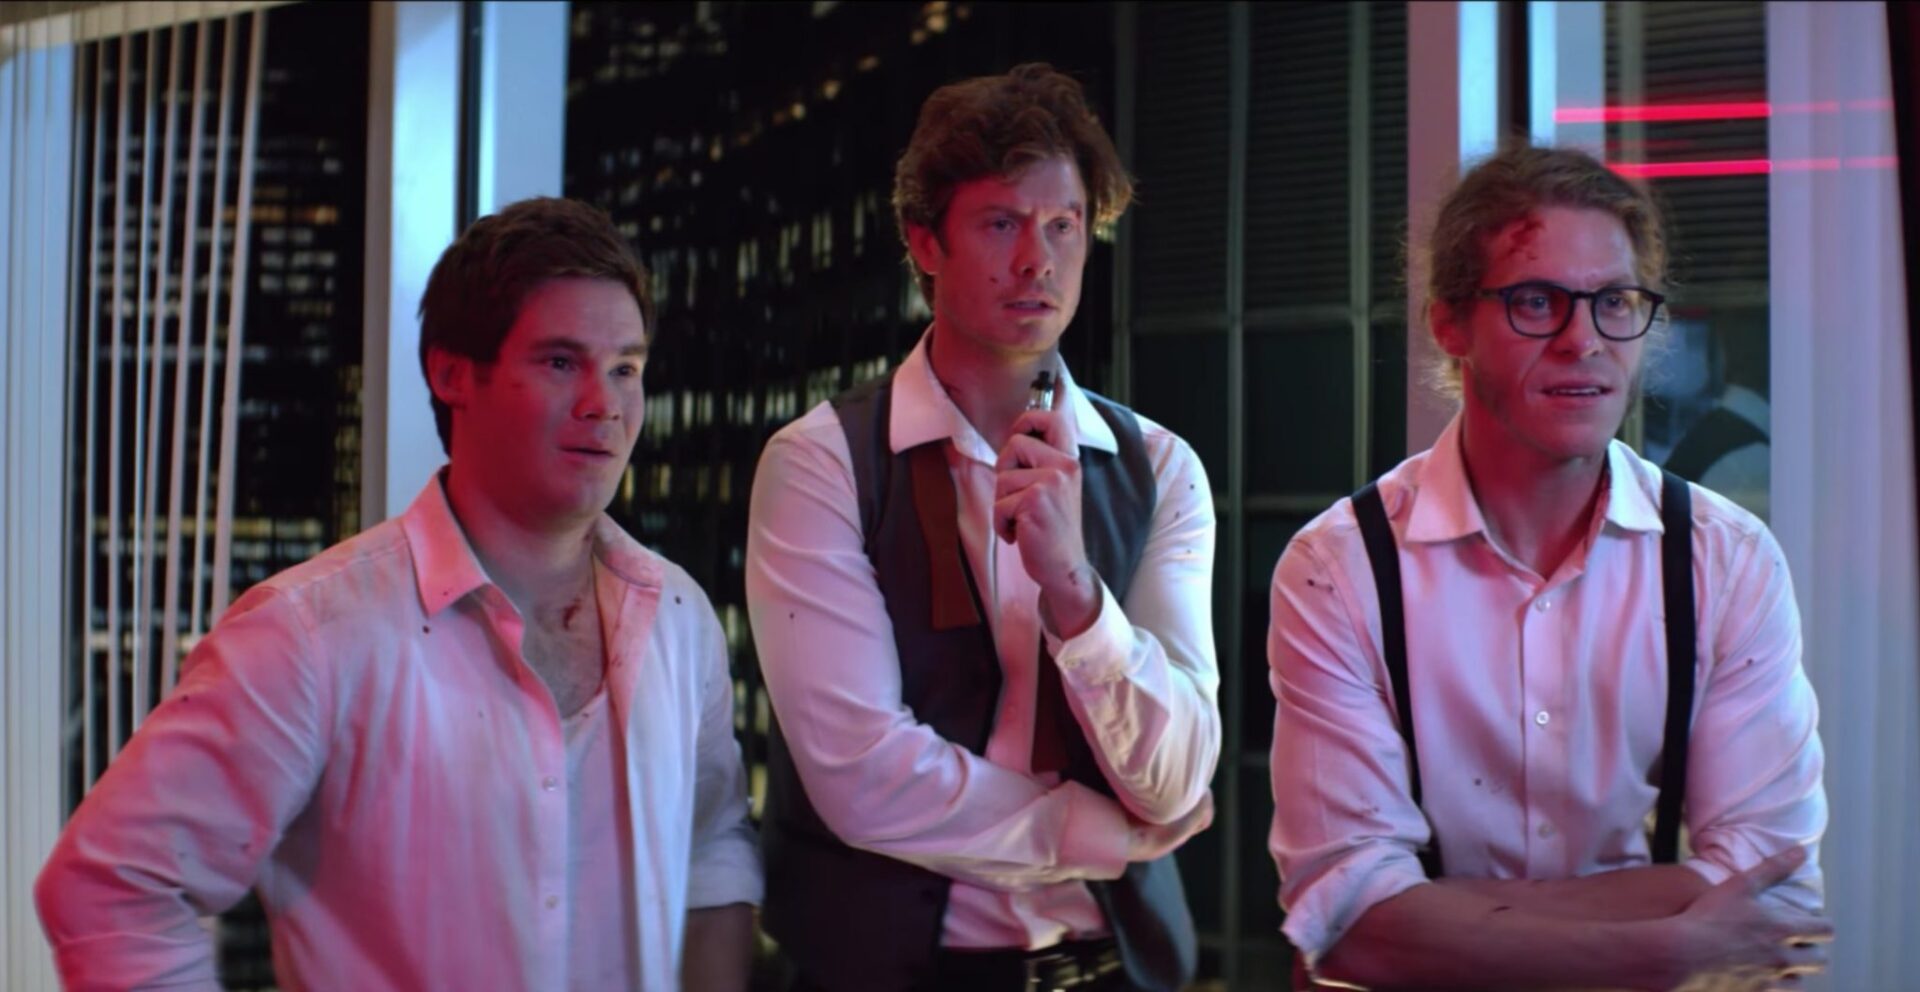 Netflix teams up with the ‘Workaholics’ trio in trailer for ‘Game Over, Man!’